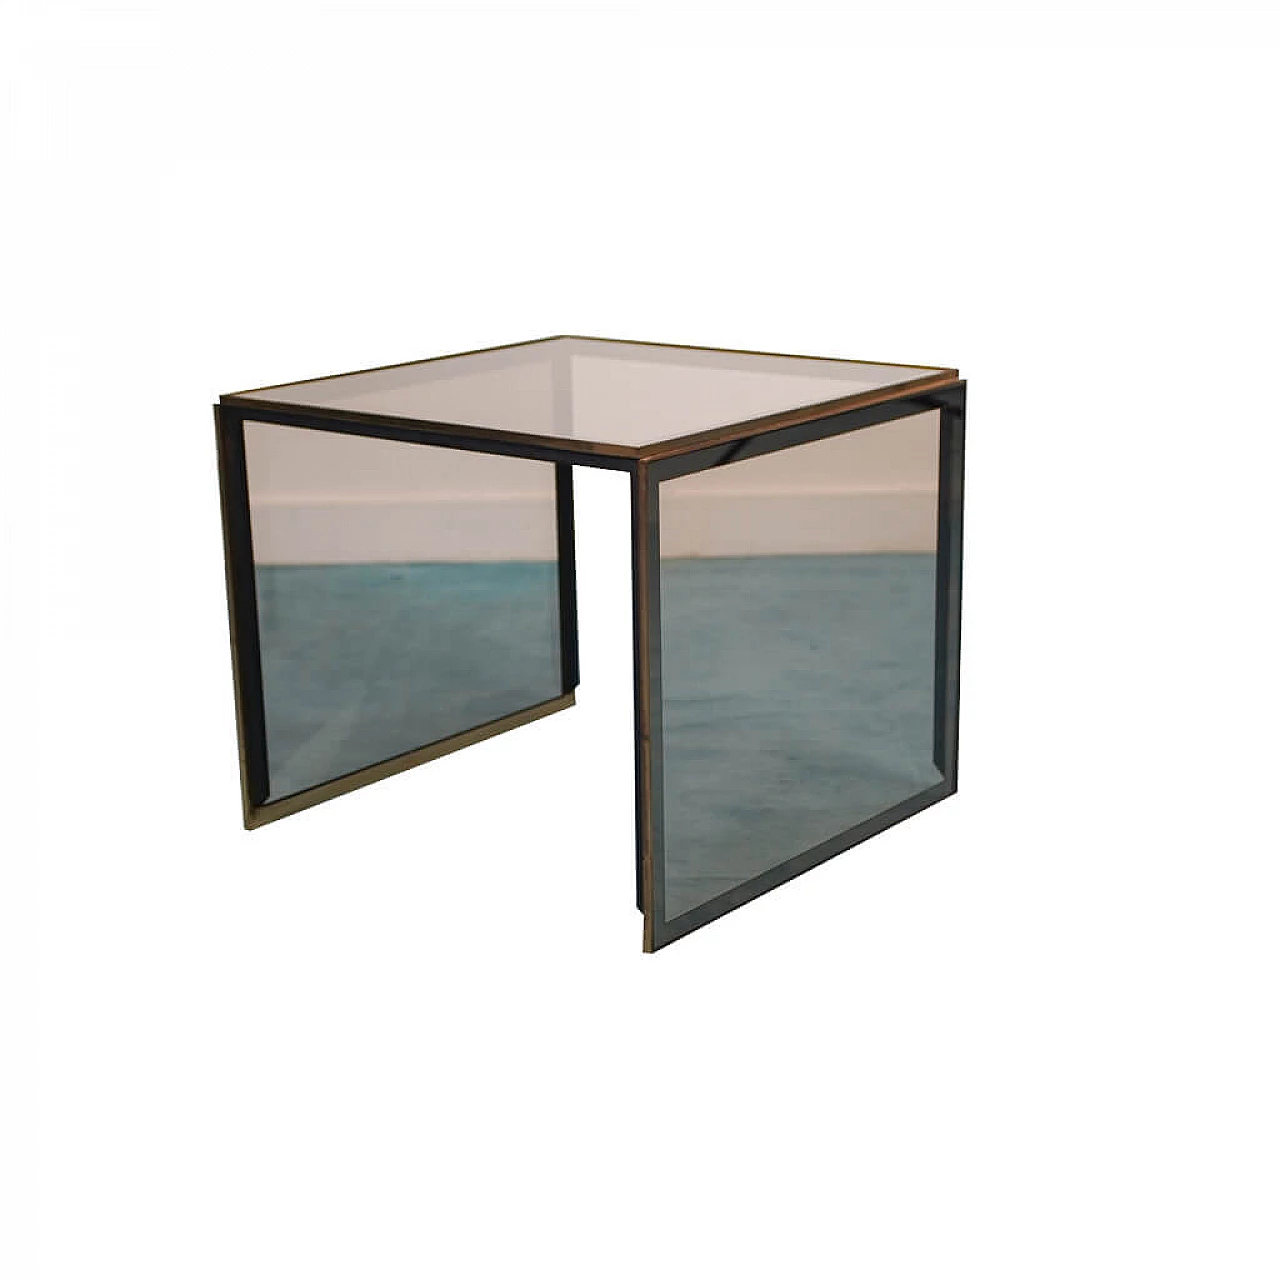 Glass and brass coffee table, Willy Rizzo, 1970s 1121102